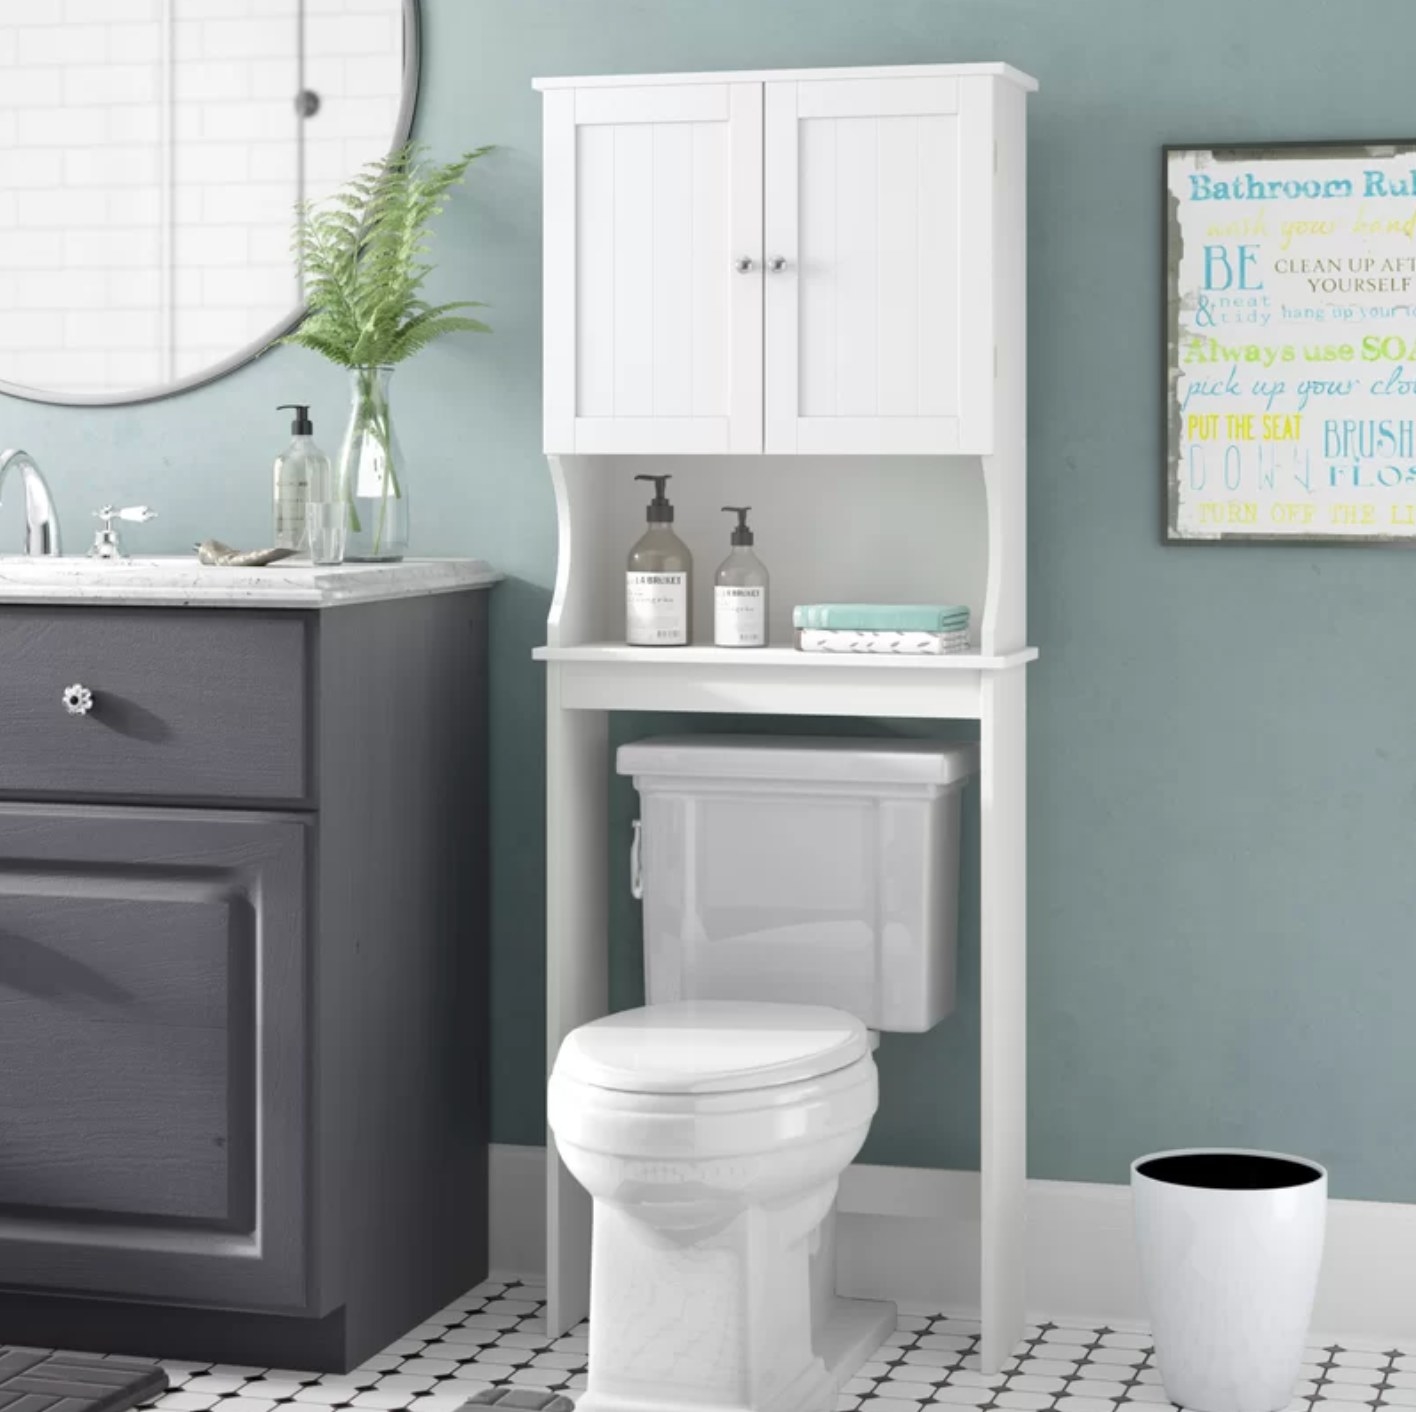 The over-the-toilet organizer in white